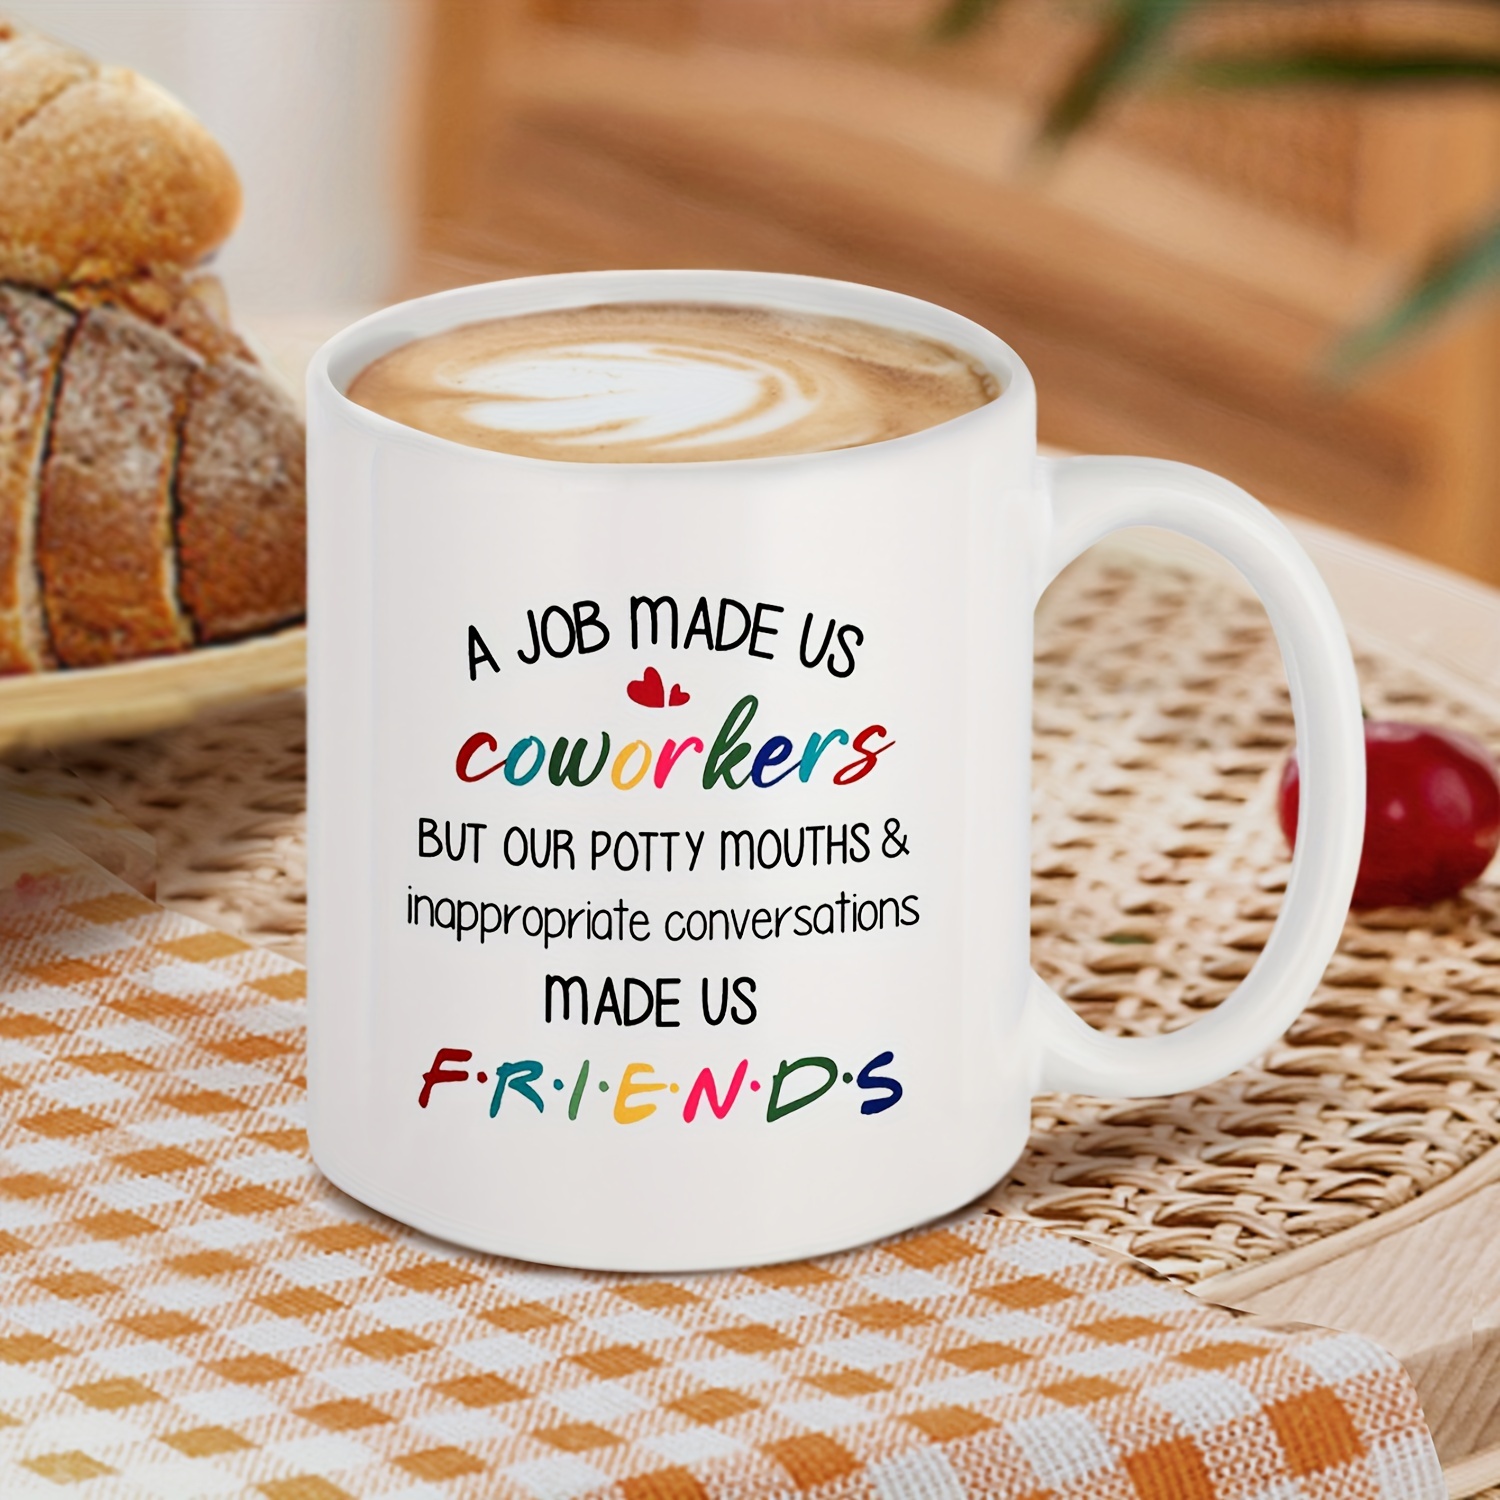 Funny Gifts for Coworkers, Friends, Females, Work Bestie Gifts for Women, Thoughtful Best Friends, Office Appreciation, Thank You Gift for Coworkers